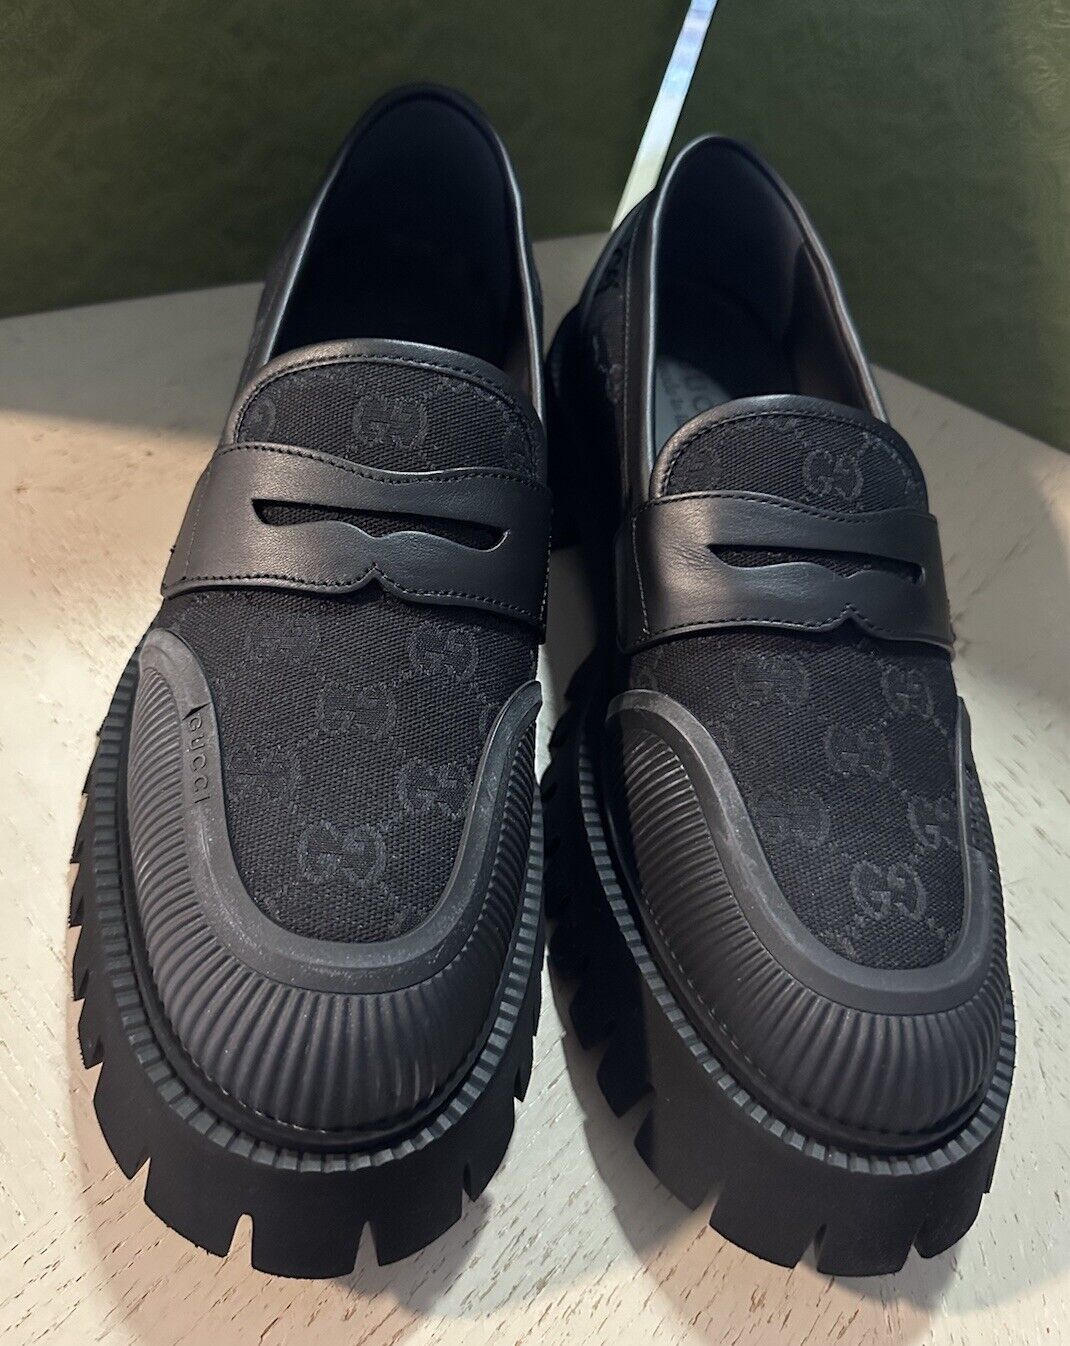 Gucci Mens GG Logo light weight Loafers Shoes Black 11 US/10 UK 739776 New